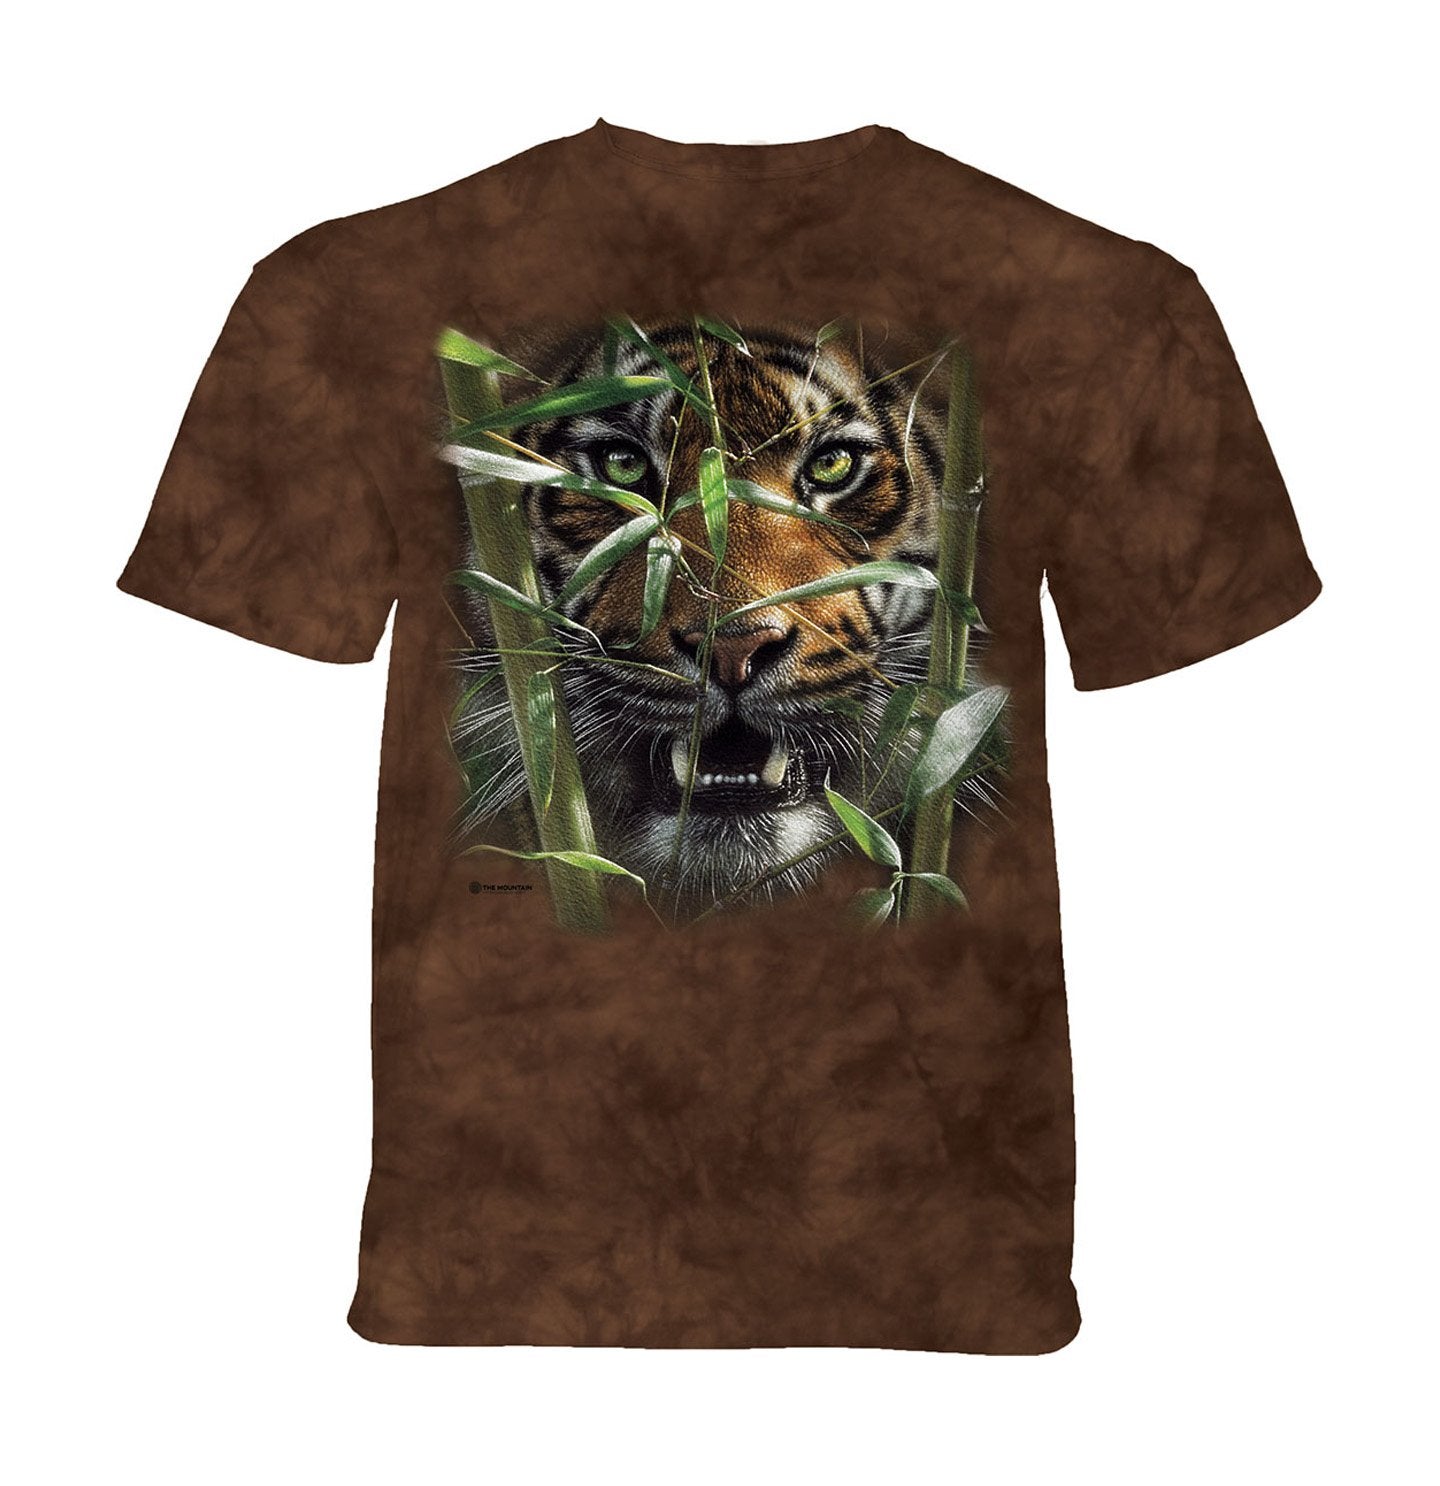 The Mountain - Hungry Tiger Eyes - Kids' Unisex T-Shirt